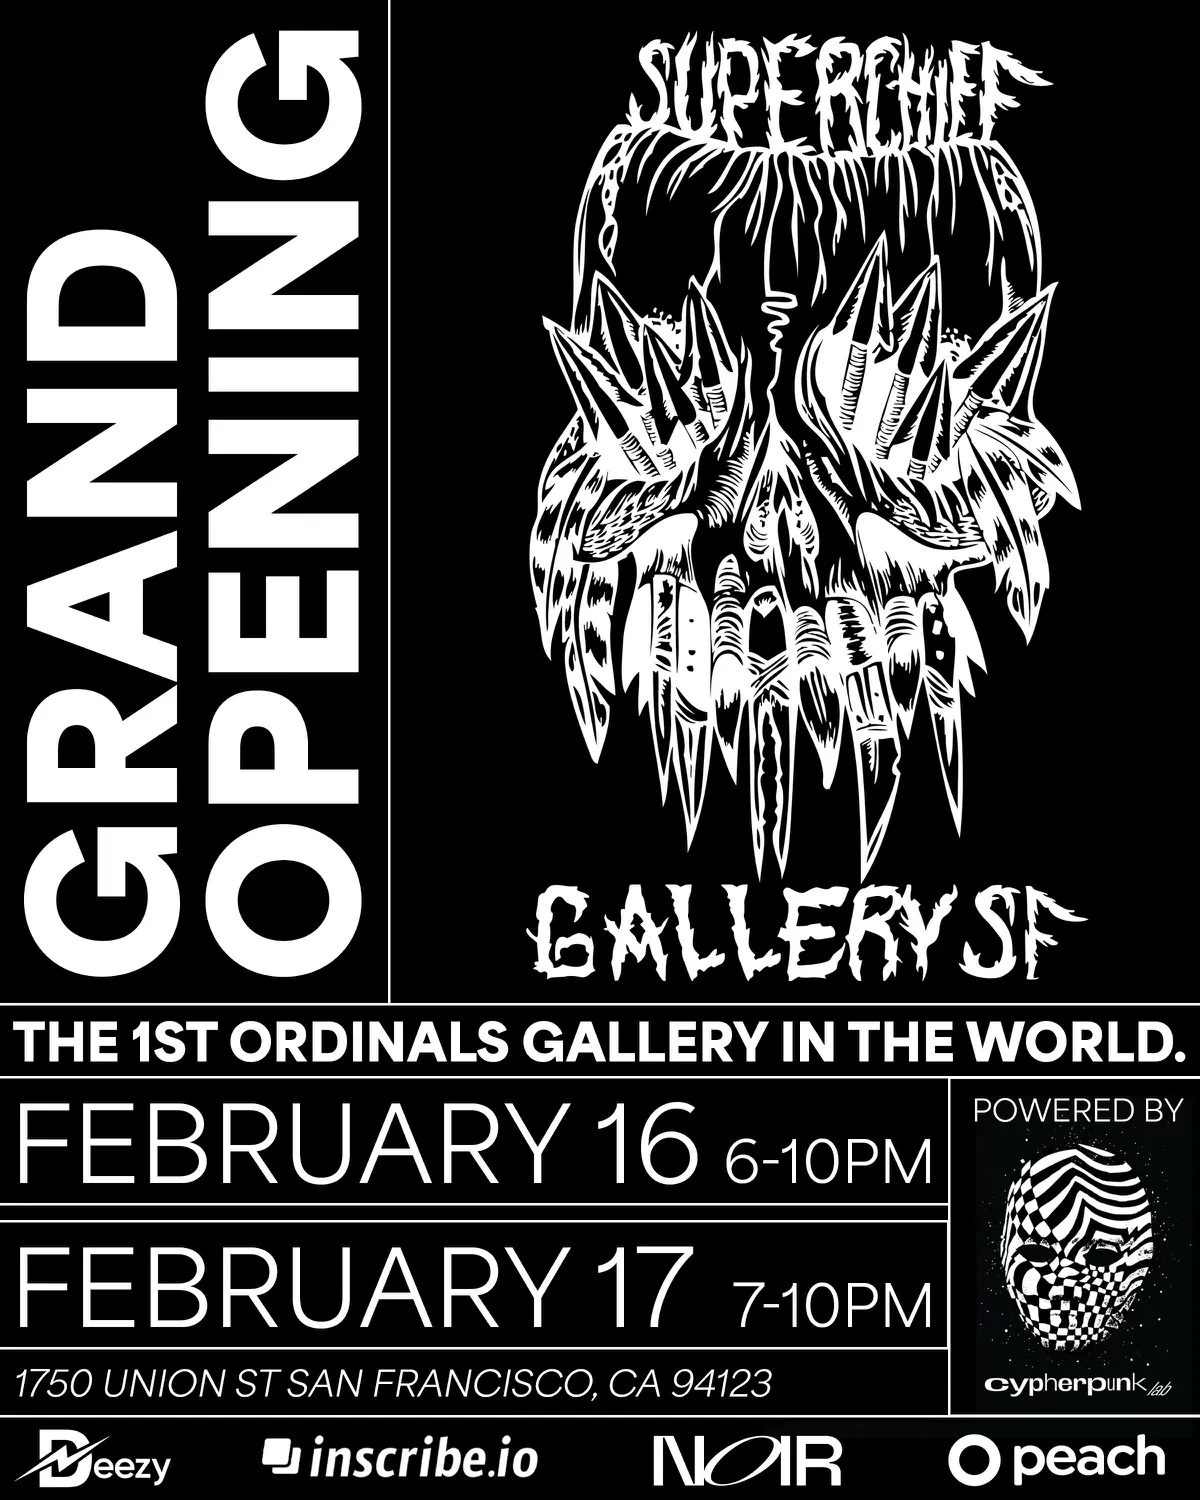 A flyer from the Superchief Gallery SF opening weekend